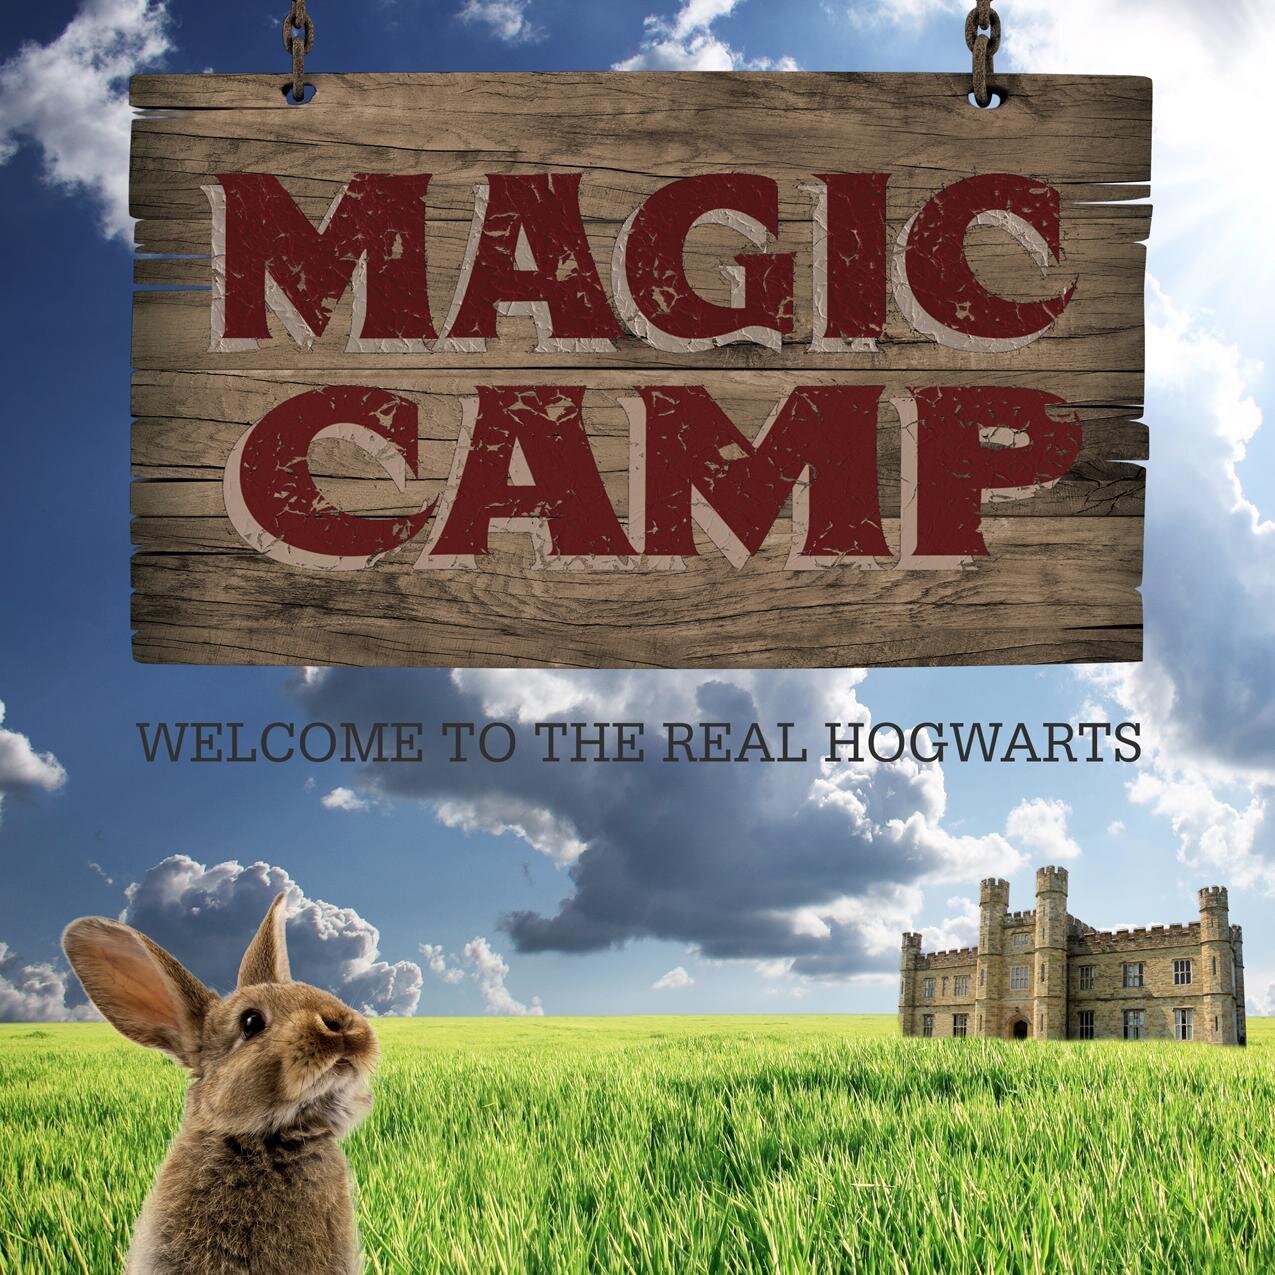 Revel in your quirkiness & let your freak flag fly at #MagicCamp • Watch the “irresistible” (@nytimes) award-winning doc #NowStreaming • Dir: @juddehrlich 🎩🐇✨